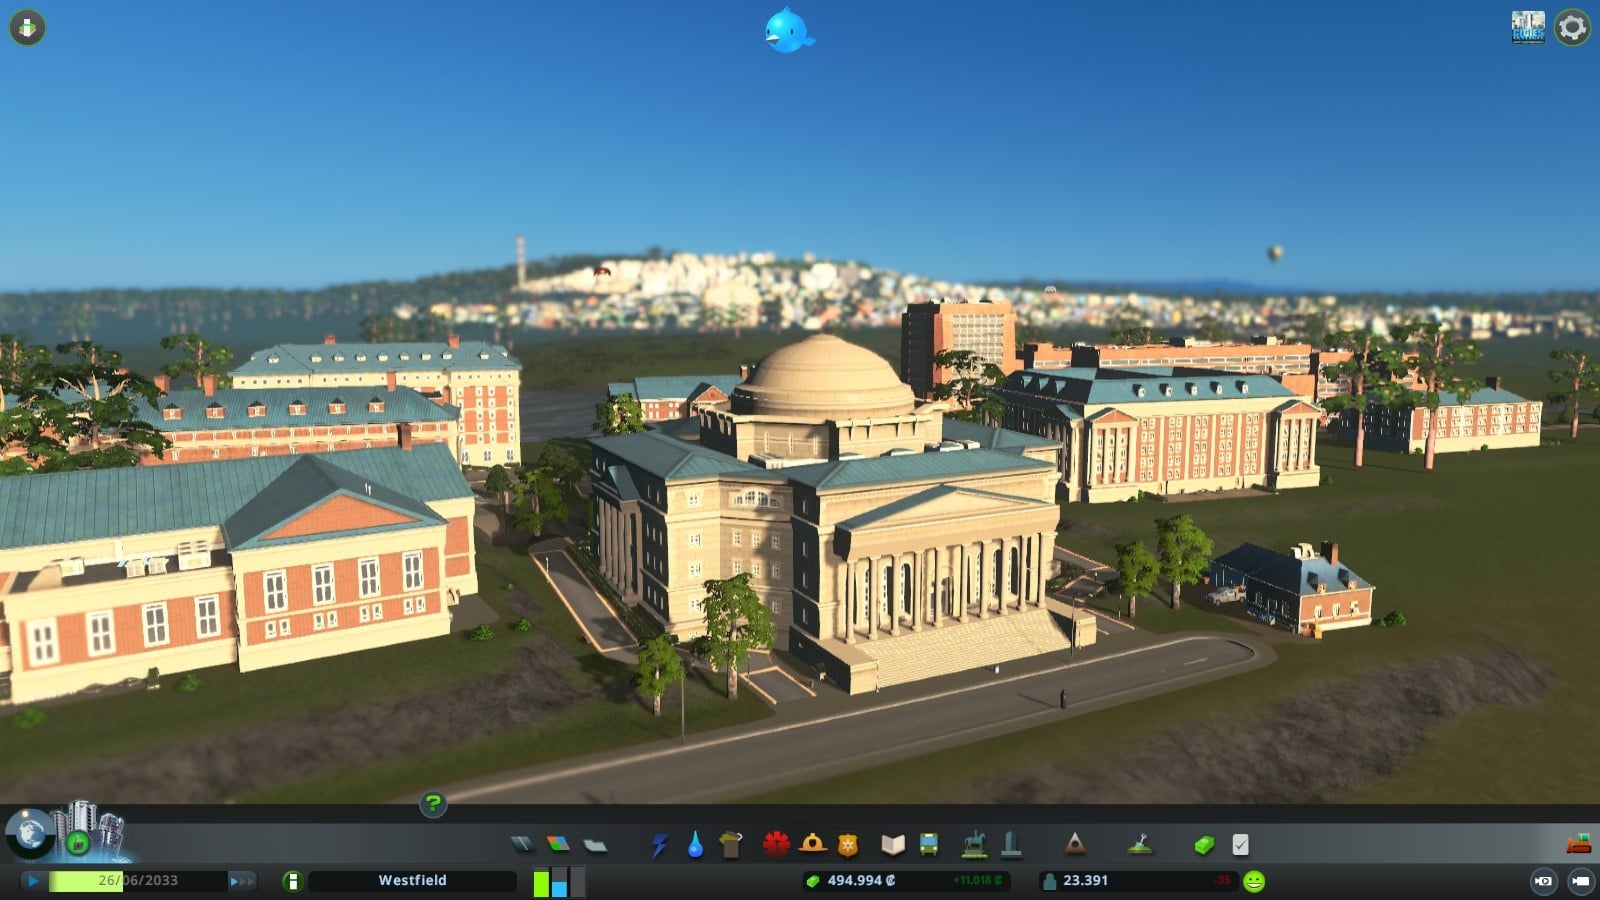 Cities: Skylines still looks good for a game of its genre, even without graphics mods. Who wouldn't want to study here?